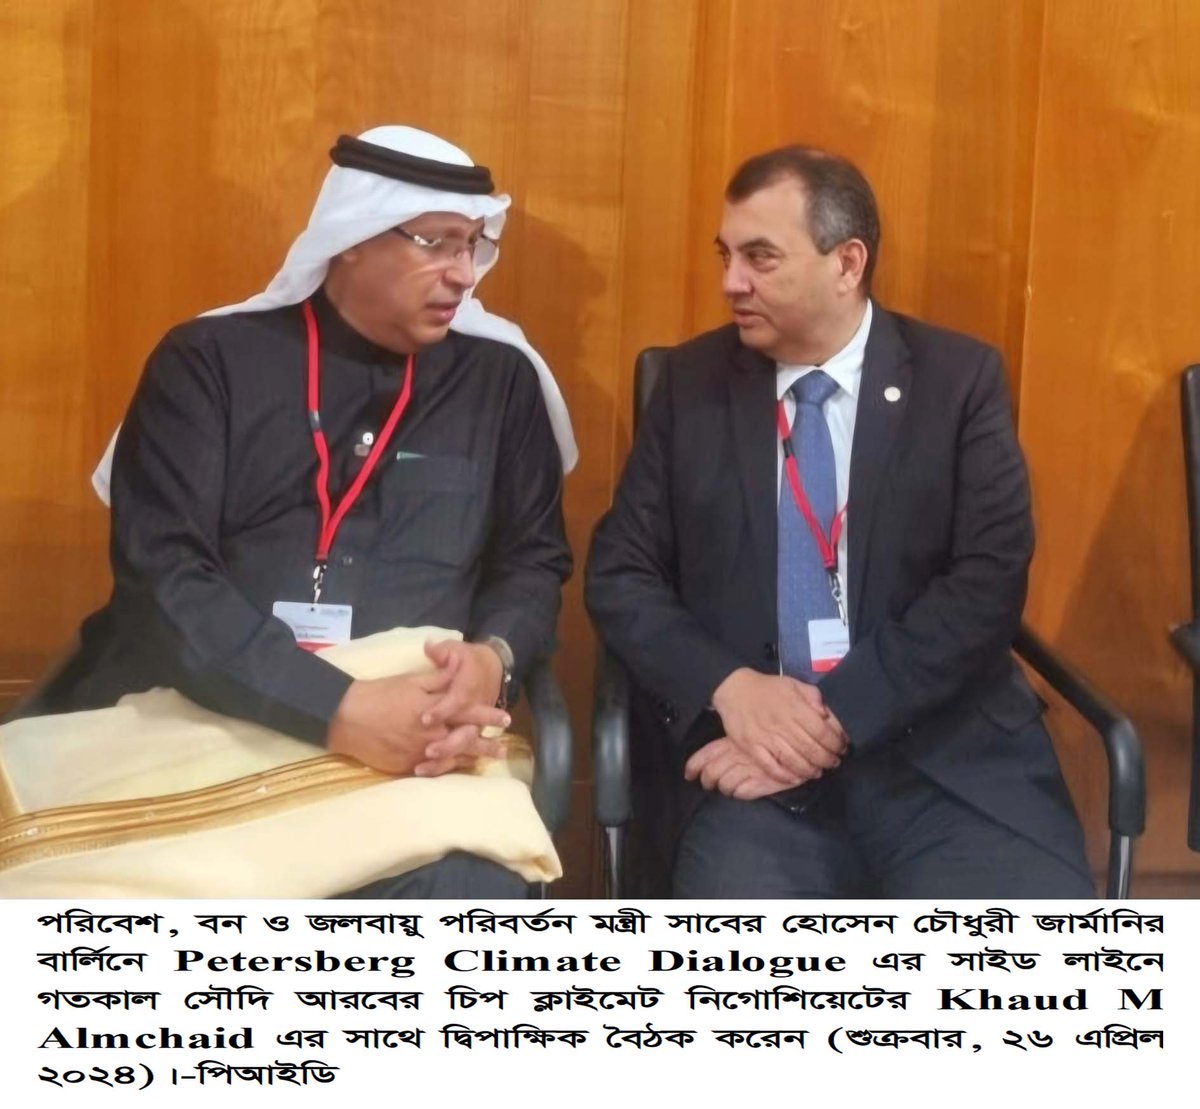 Great to see Minister @saberhc fostering collaboration! 🌍 Thursday, he met with Saudi Arabia's Chief Climate Negotiator Khalid M. Almehaid at the Petersberg Climate Dialogue in Berlin, Germany. Important discussions for #ClimateAction! #PetersbergDialogue'